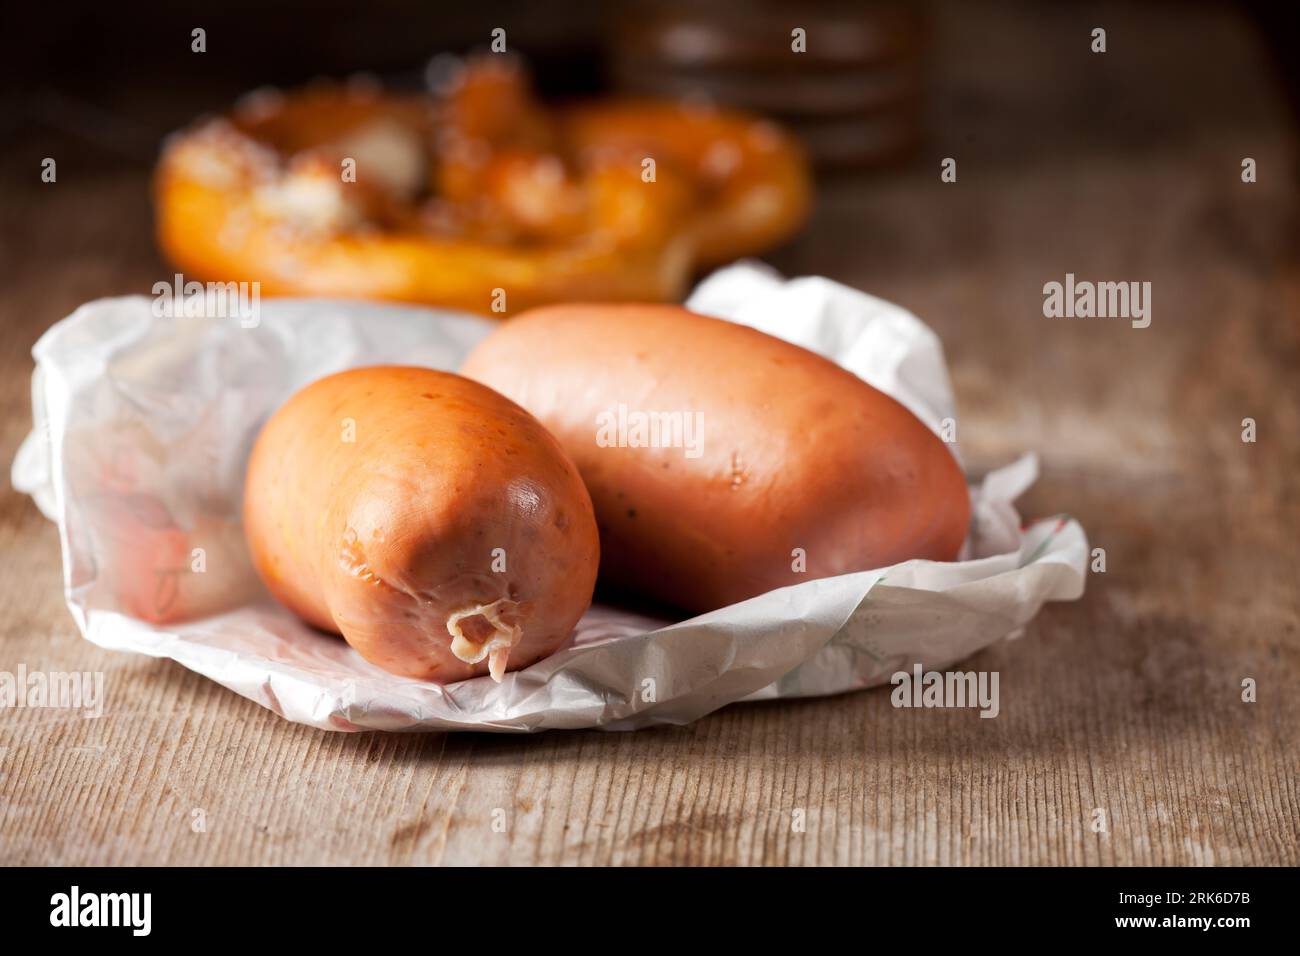 two bavarian sausages on wood Stock Photo